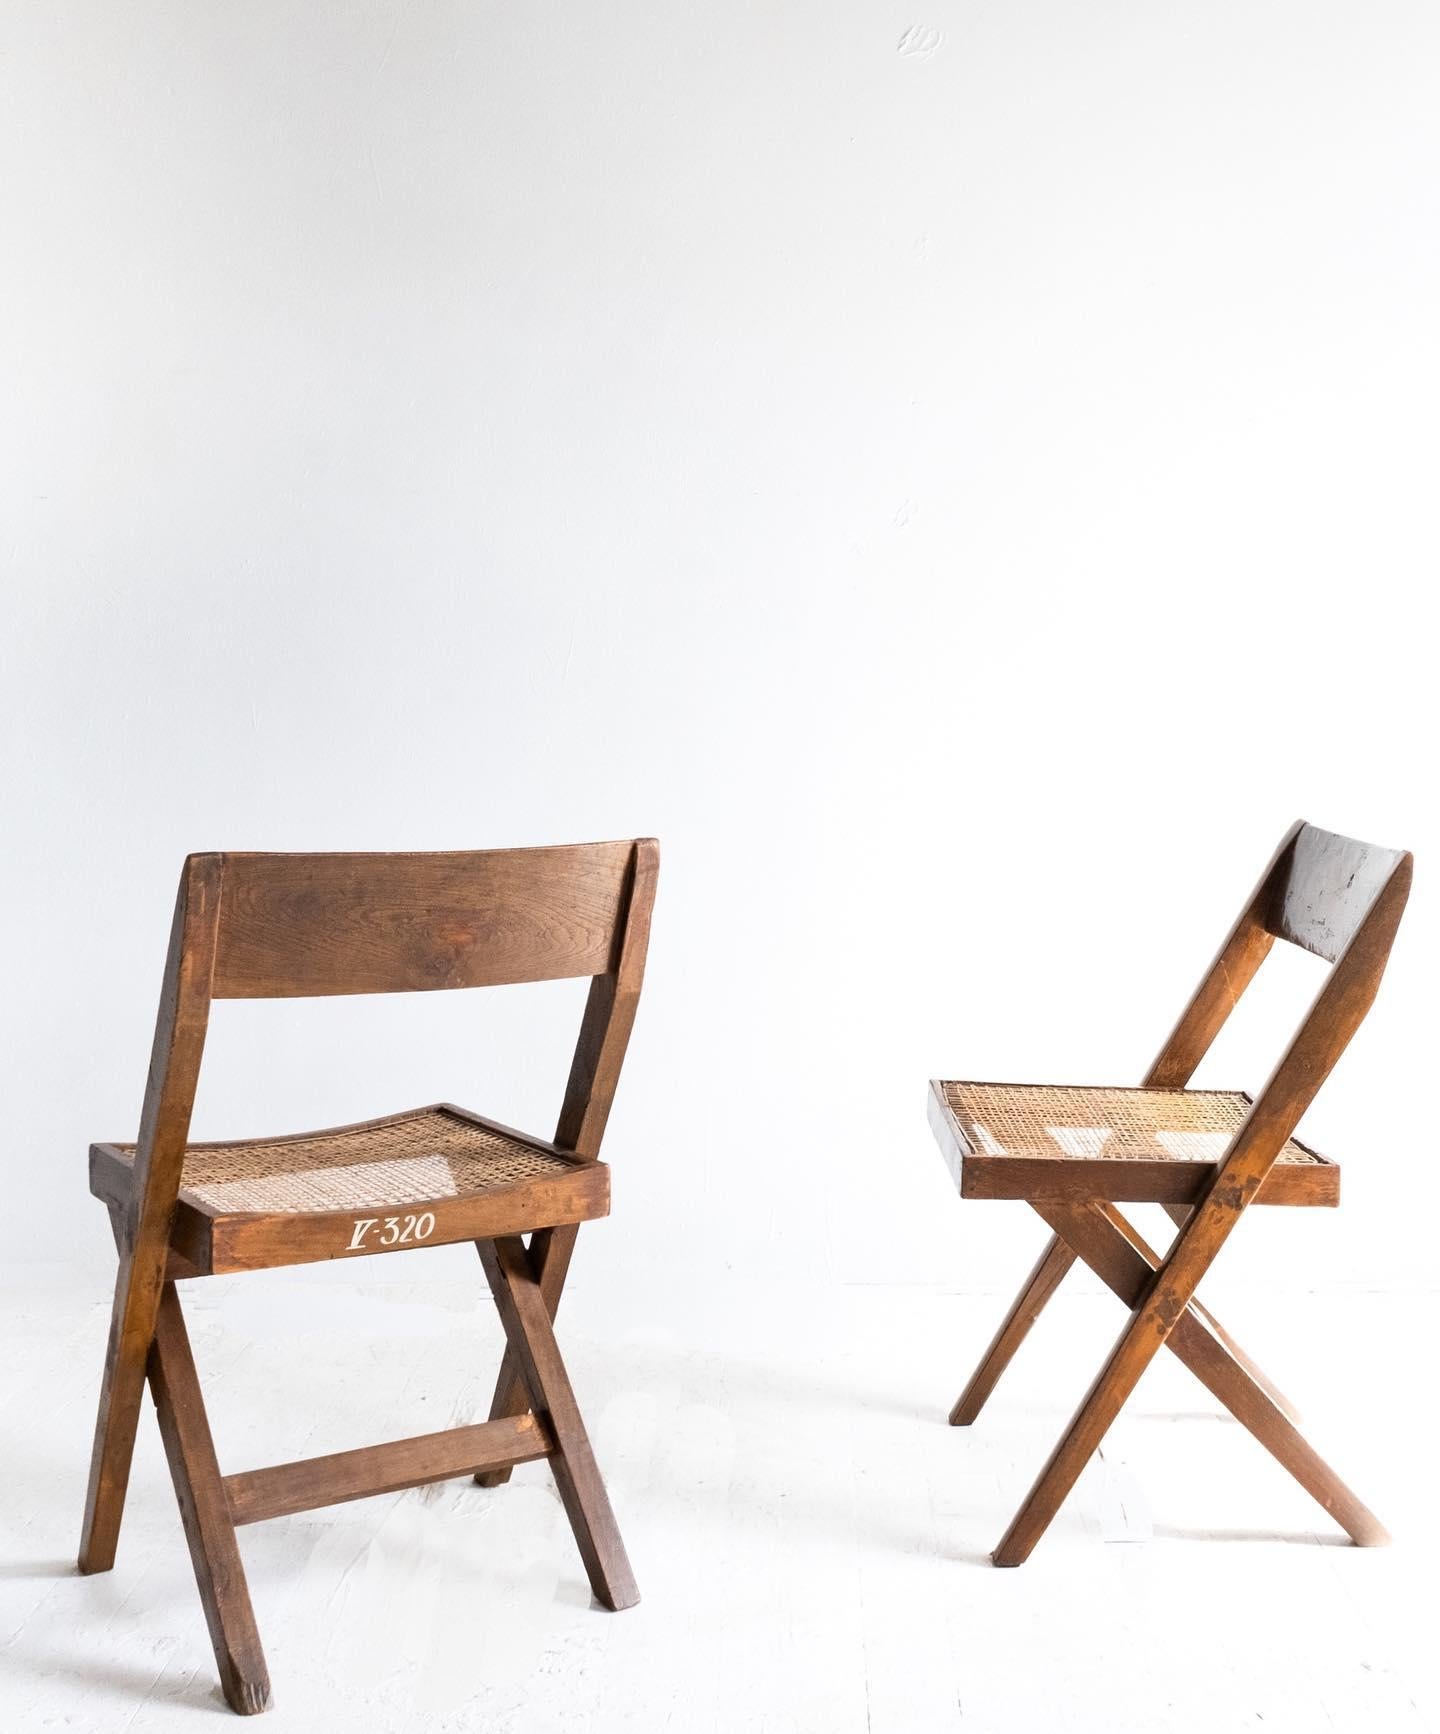 Set of two Library chairs by Pierre Jeanneret, originally designed in 1955 for University of Punjab Library in Chandigarh but later used in a variety of buildings in the new capital city. 

Currently I have these two chairs in stock but can